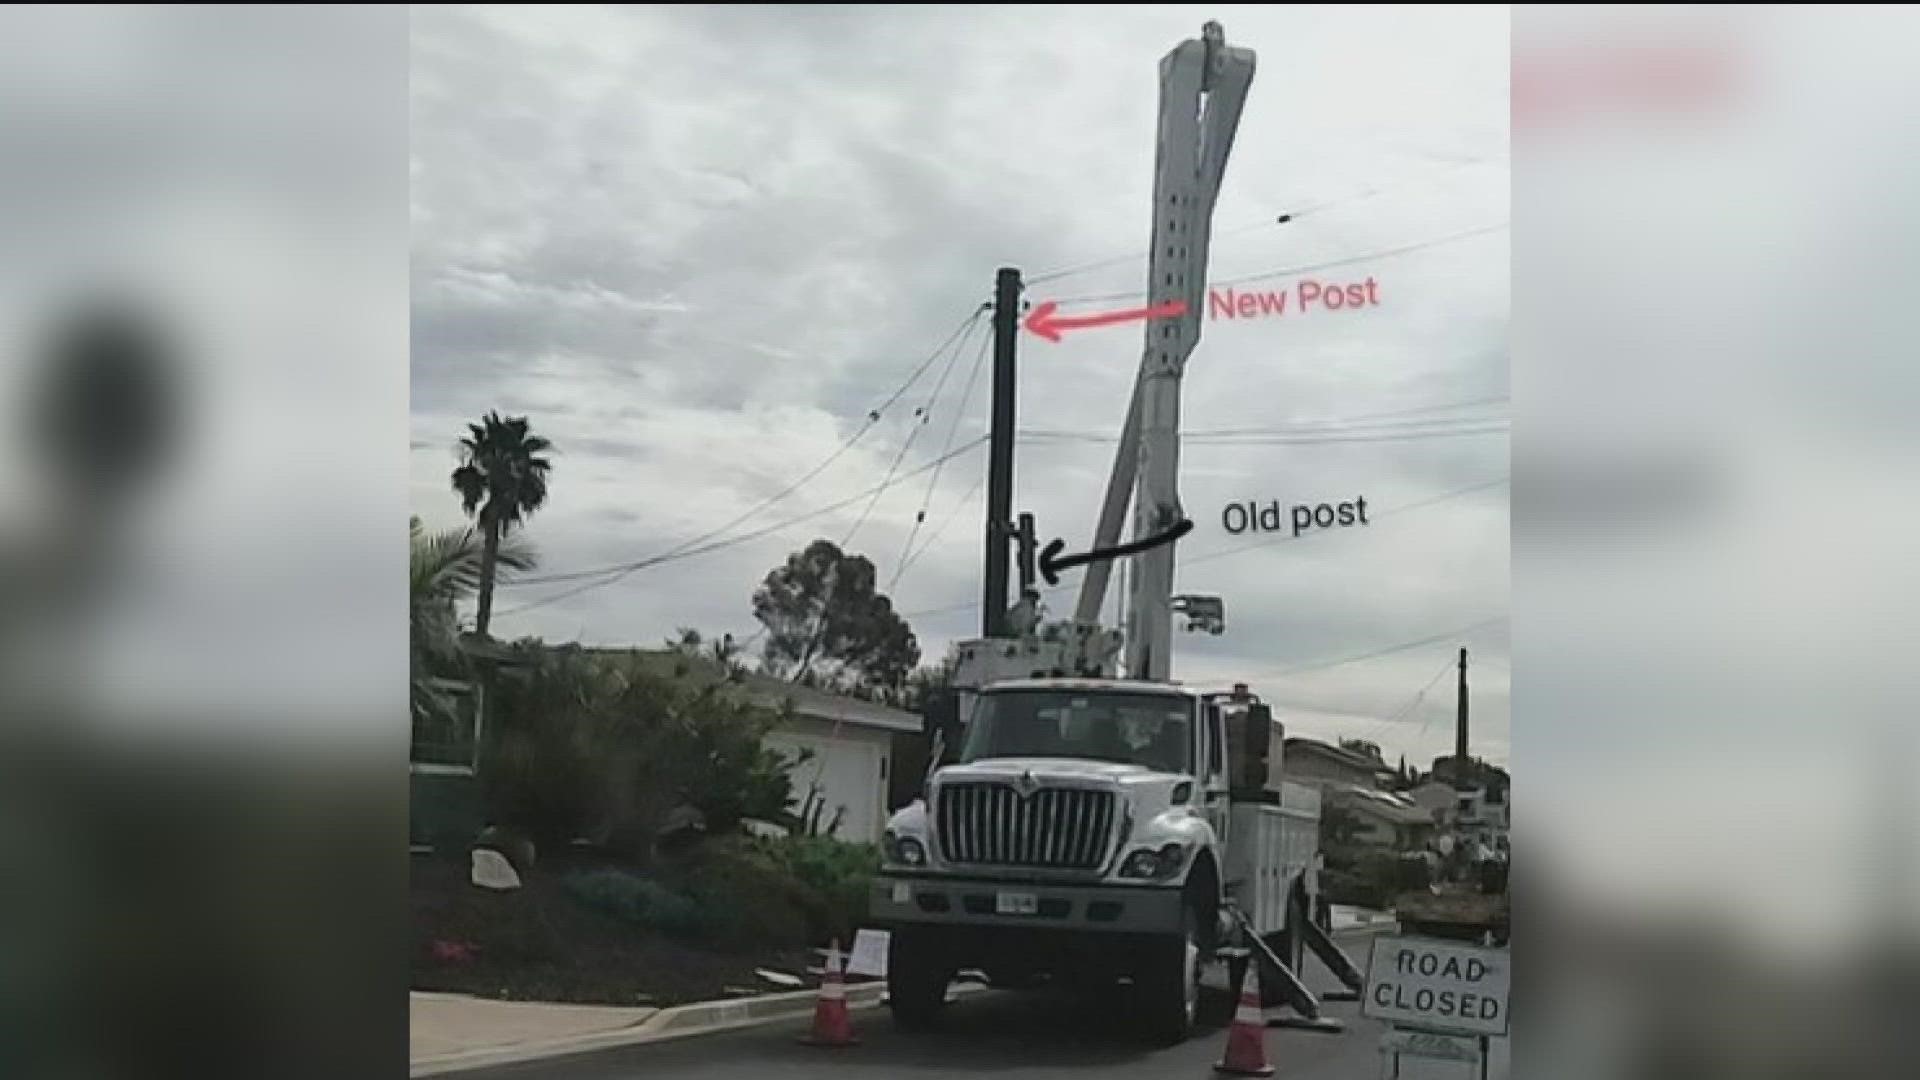 Those living on Burgener Blvd. in Bay Park say they didn't get a notice from SDG&E placing a 35-foot utility pole. However, SDG&E says otherwise.